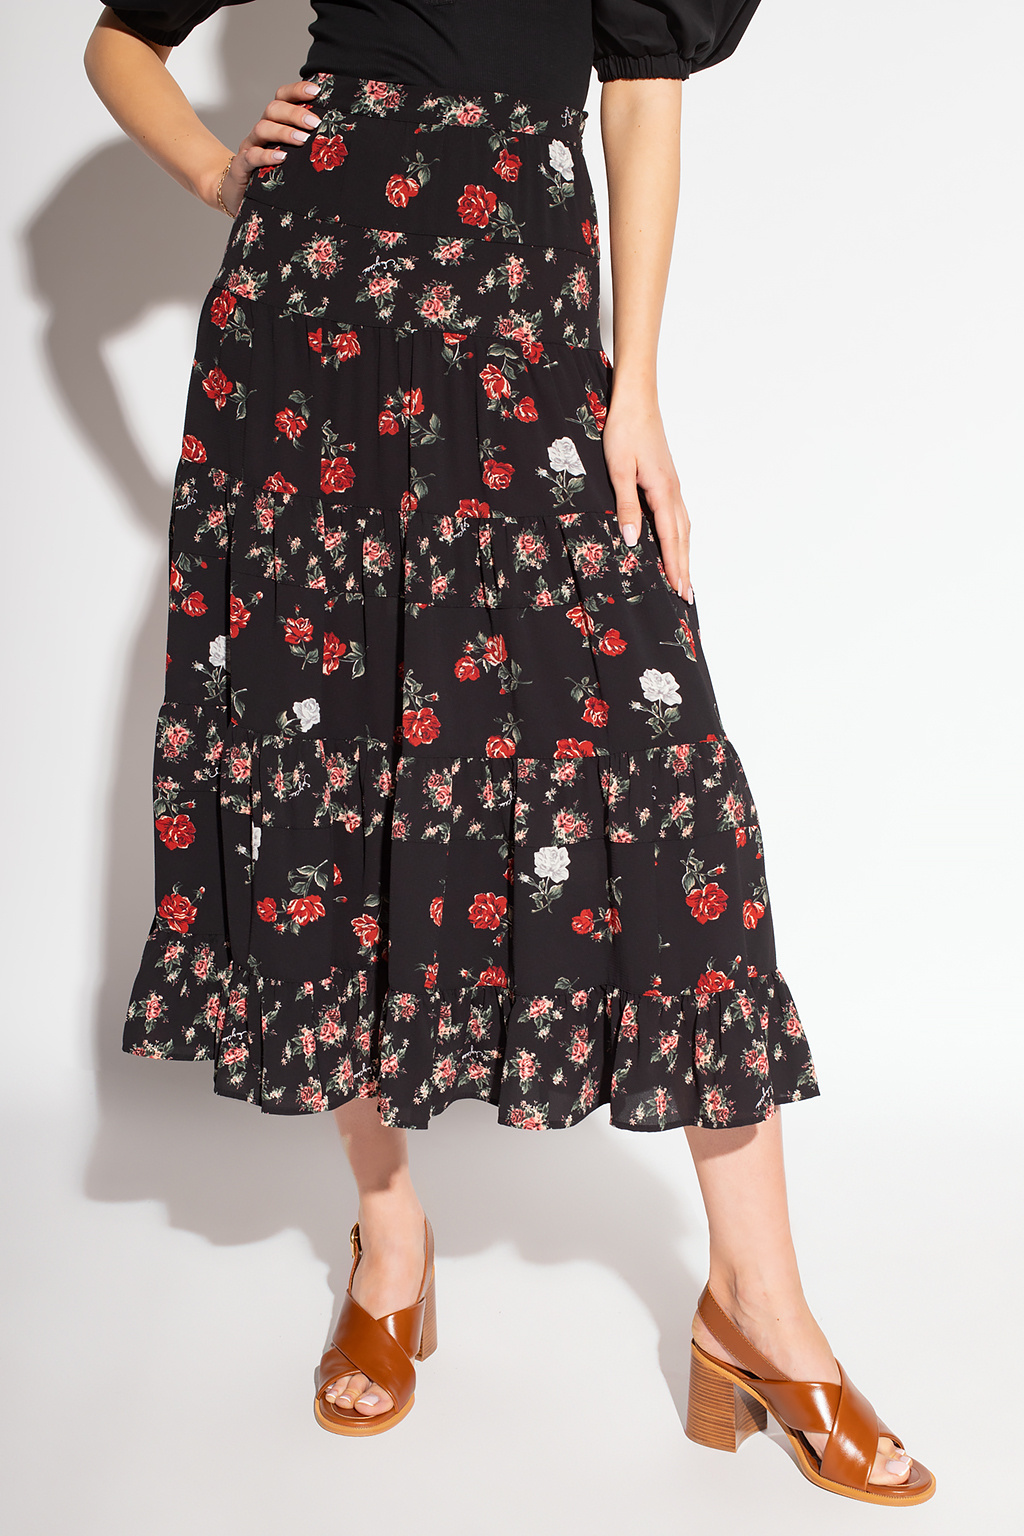 See By Chloé Floral skirt | Women's Clothing | Vitkac